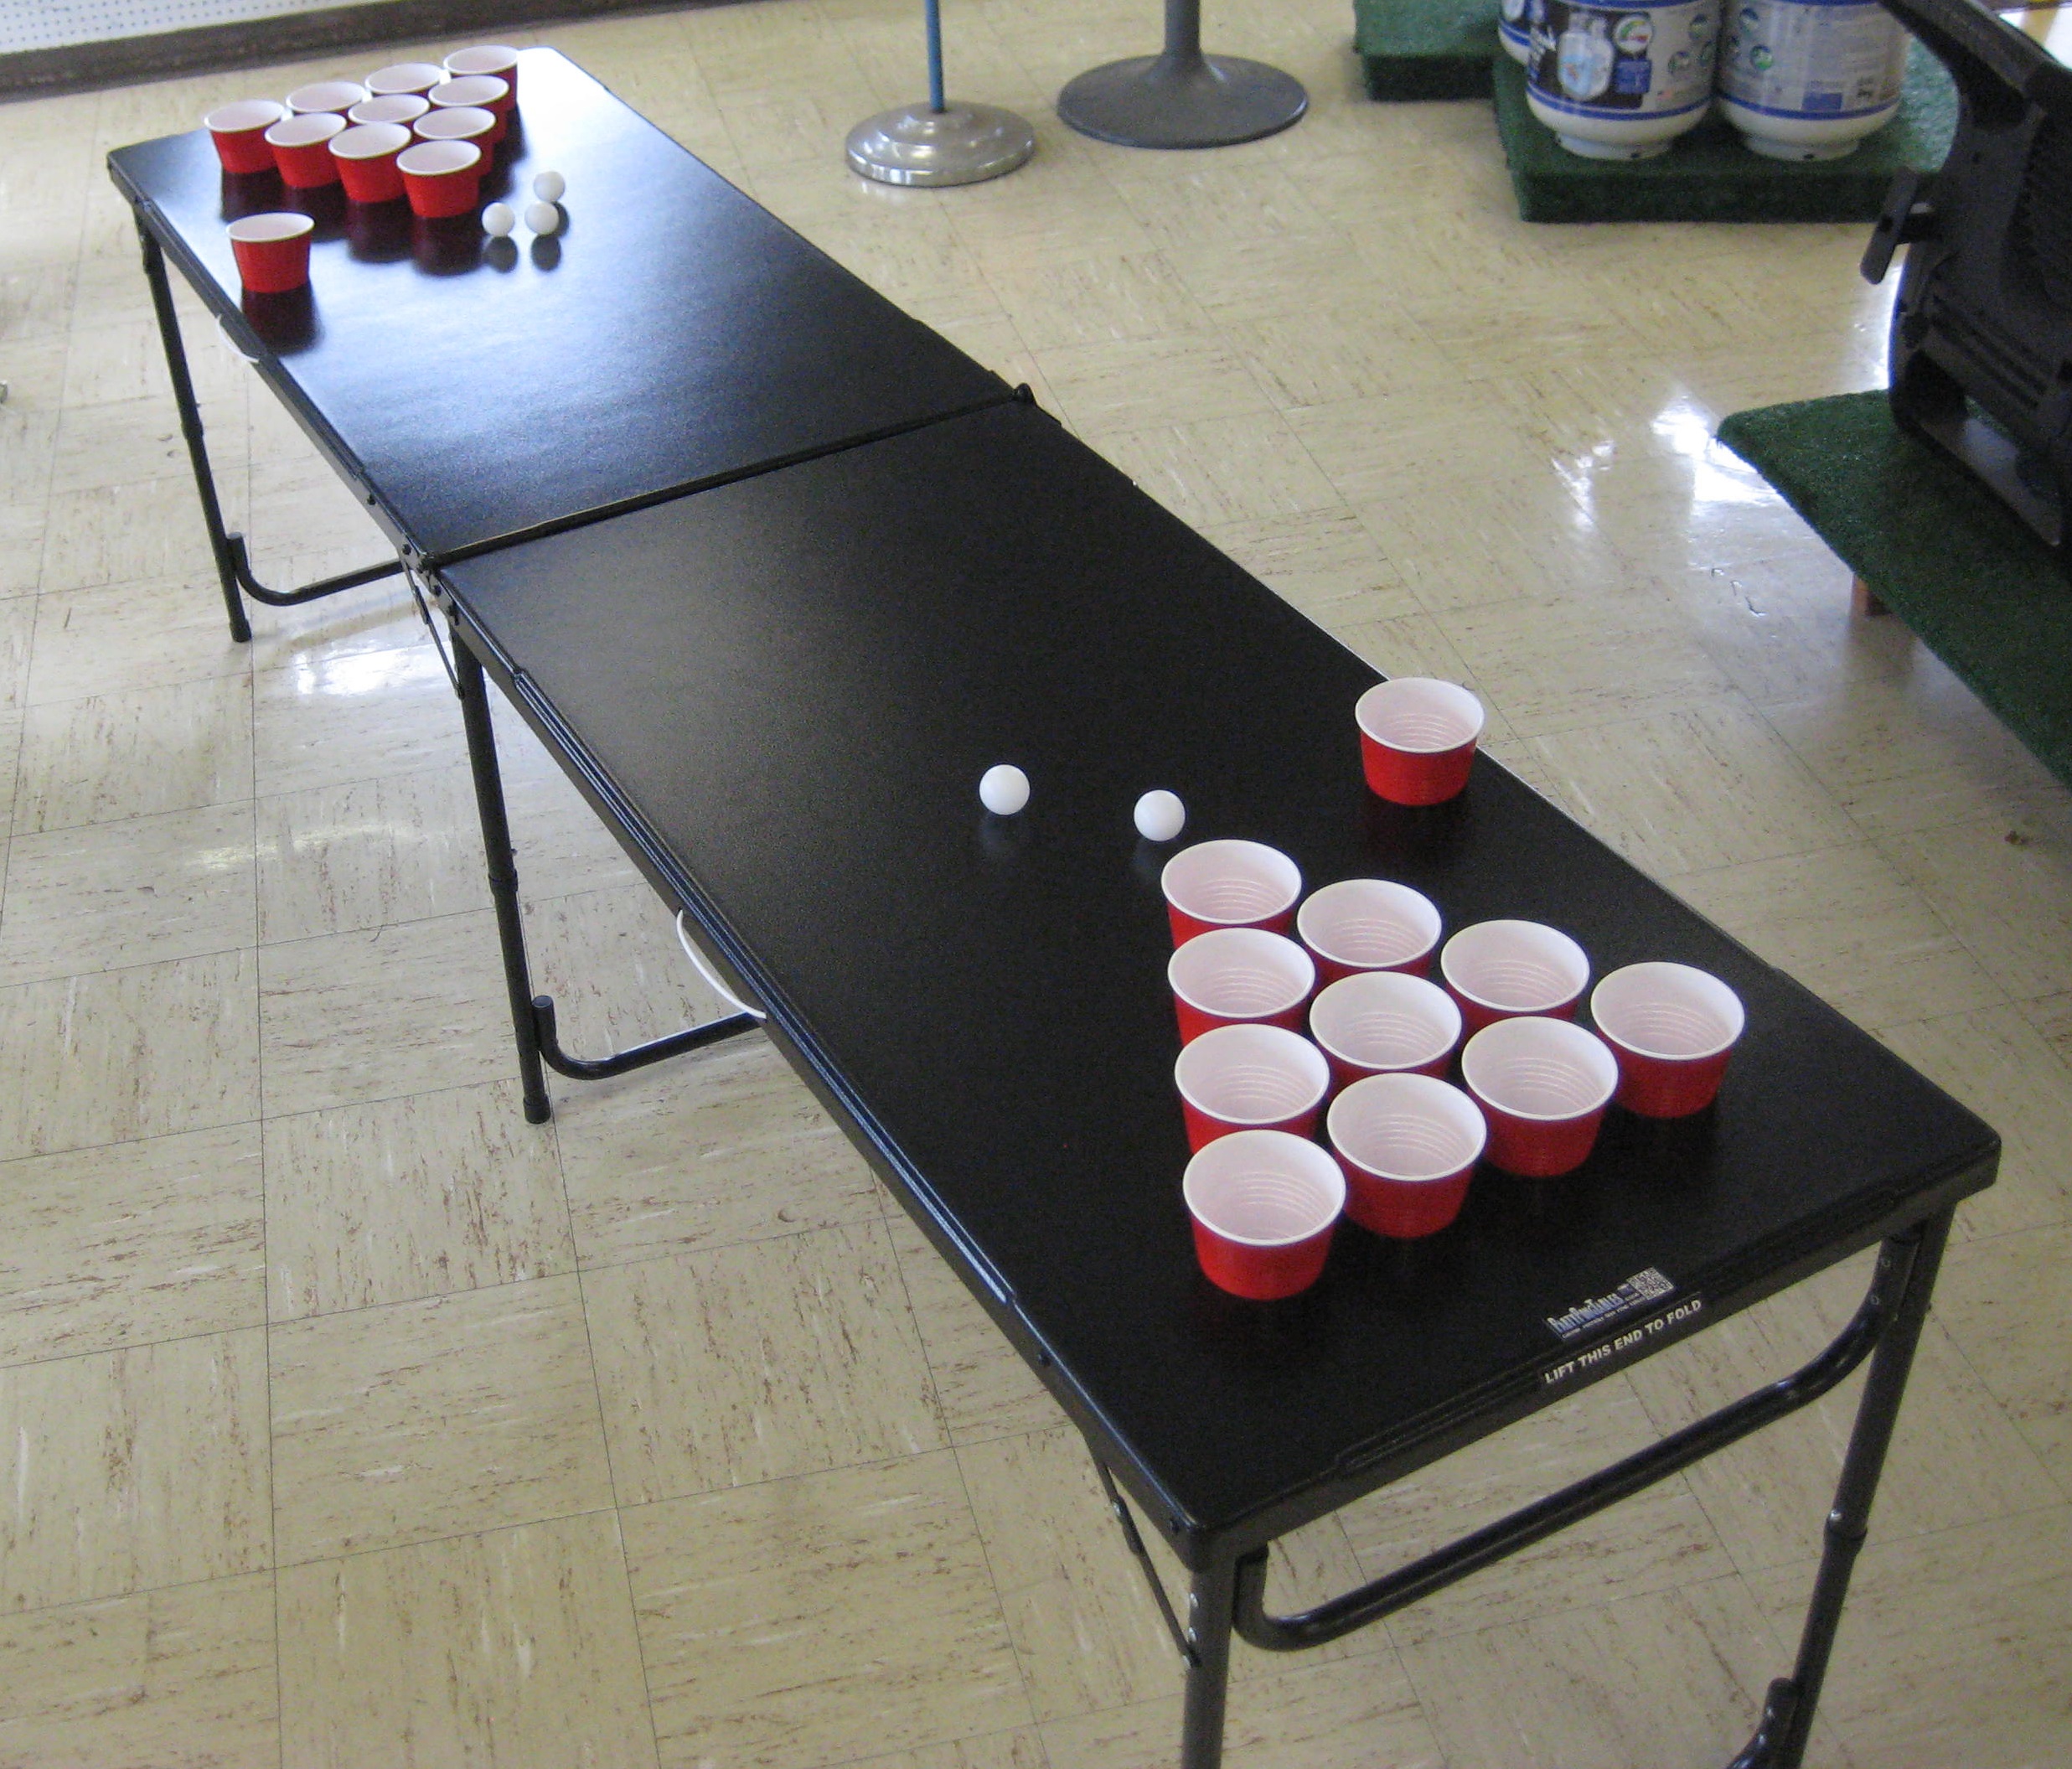 https://rental-world.com/wp-content/uploads/2014/09/Beer-Pong-Game-Table-5-Top-View.jpg